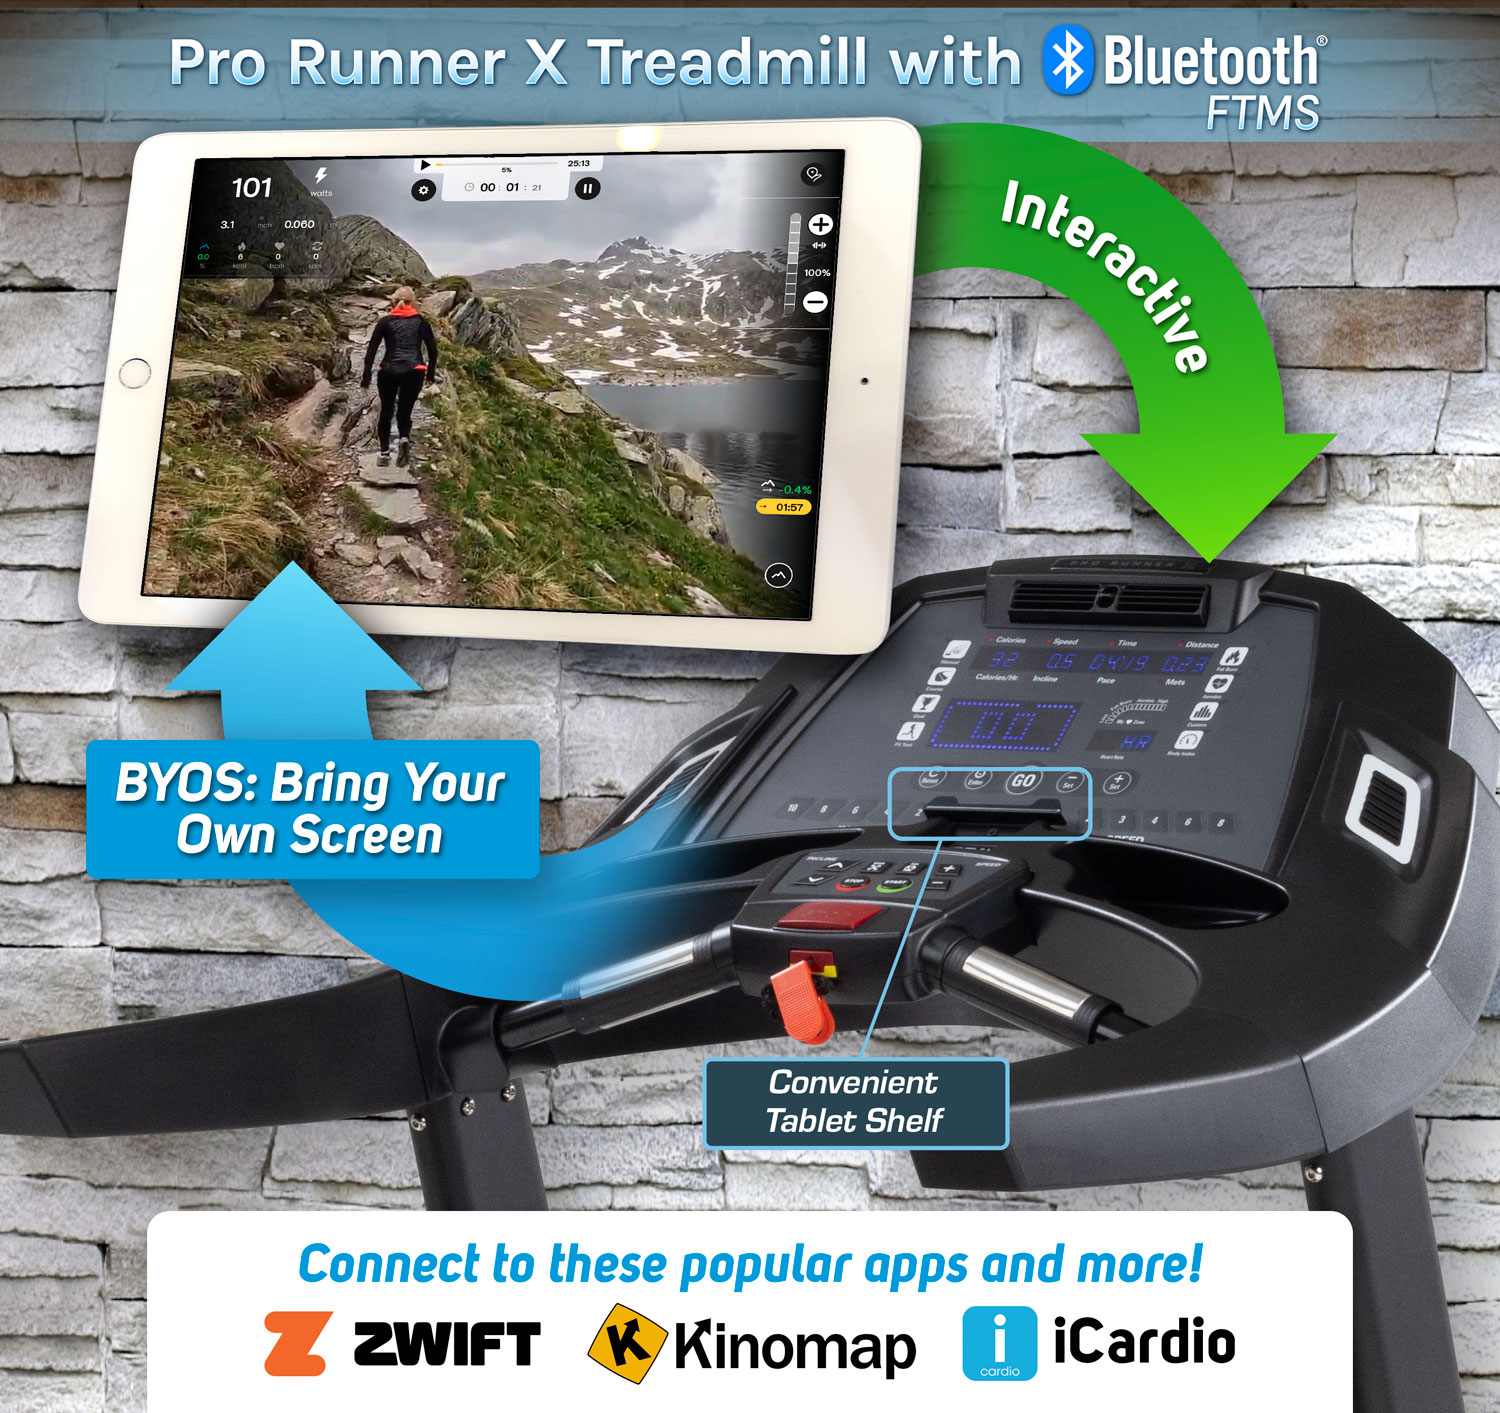 Pro Runner Treadmill with FTMS Bluetooth Connectivity